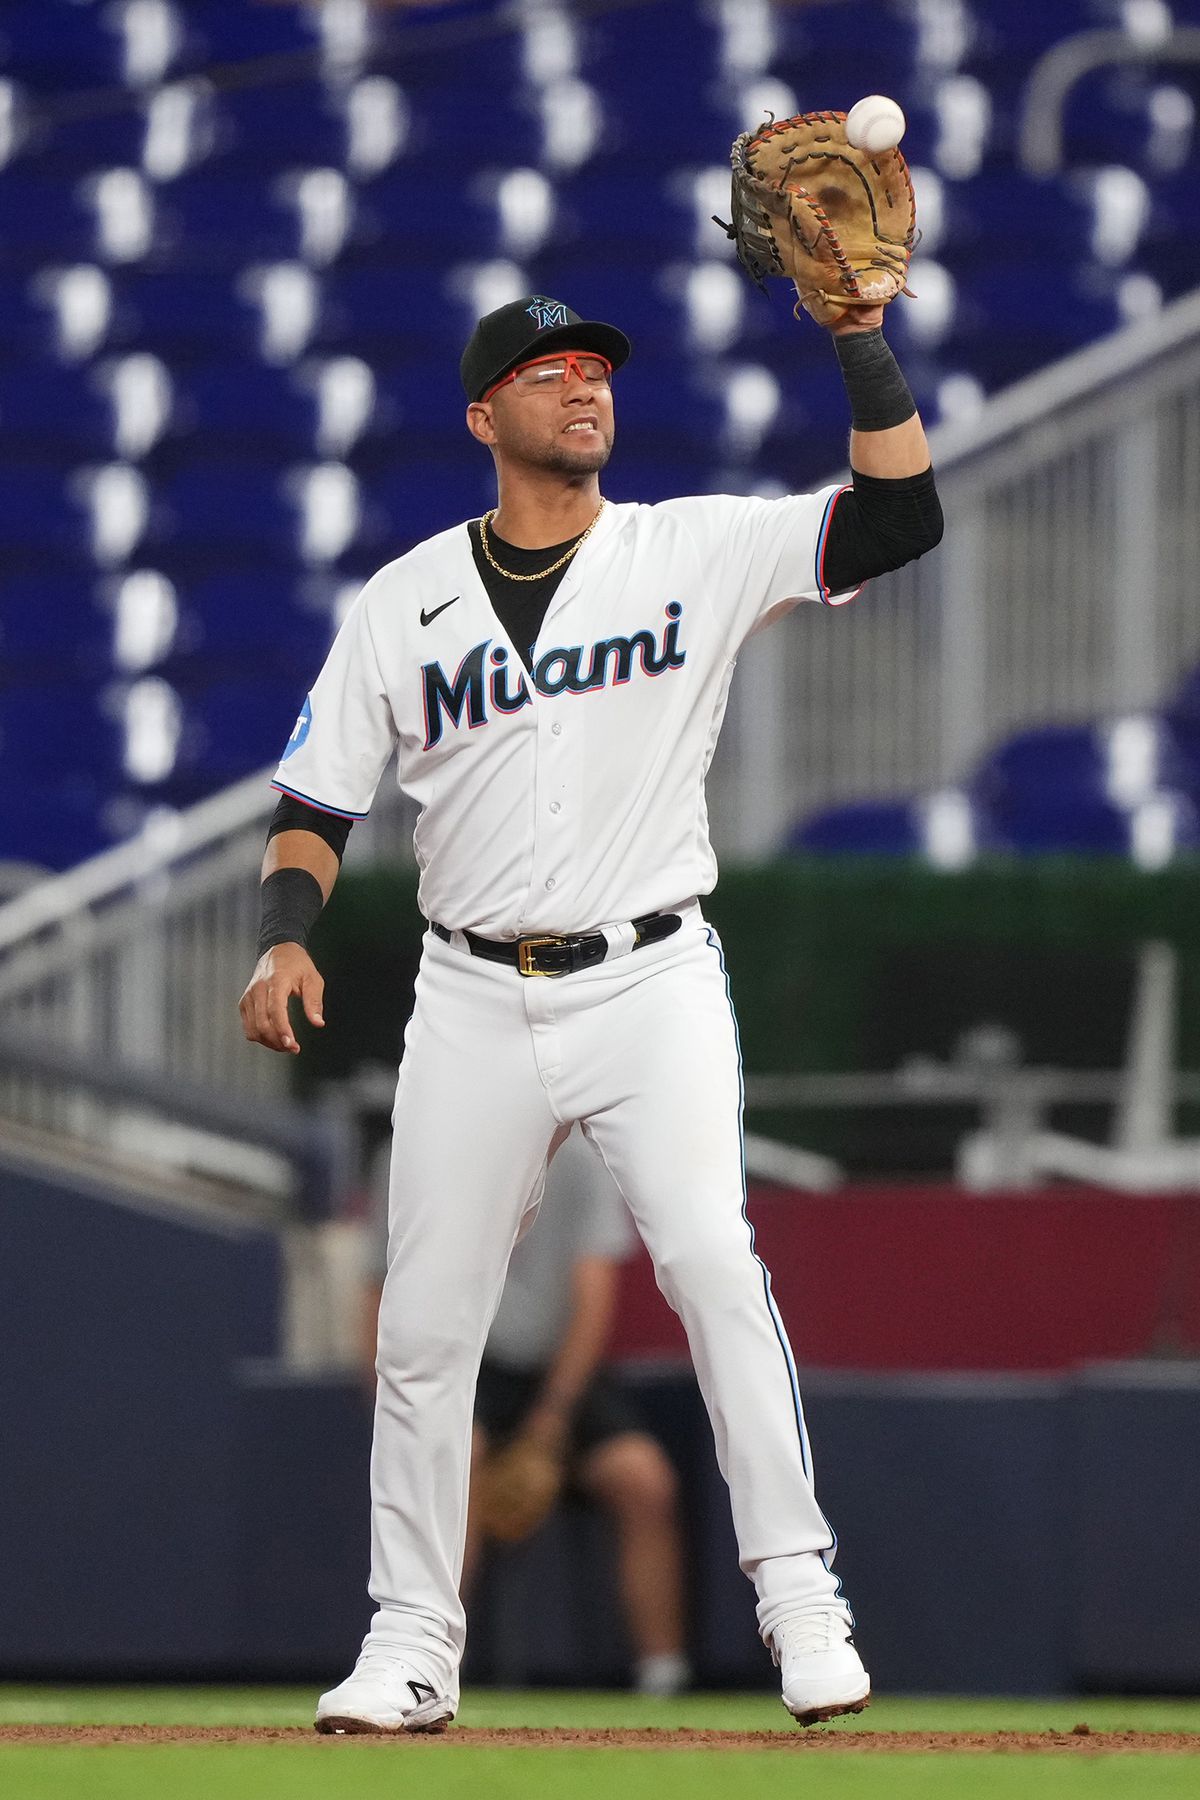 Yuli Gurriel #10 of the Miami Marlins fields the ball before a put out in the game against the San Francisco Giants at LoanDepot Park on April 17, 2023 in Miami, Florida.